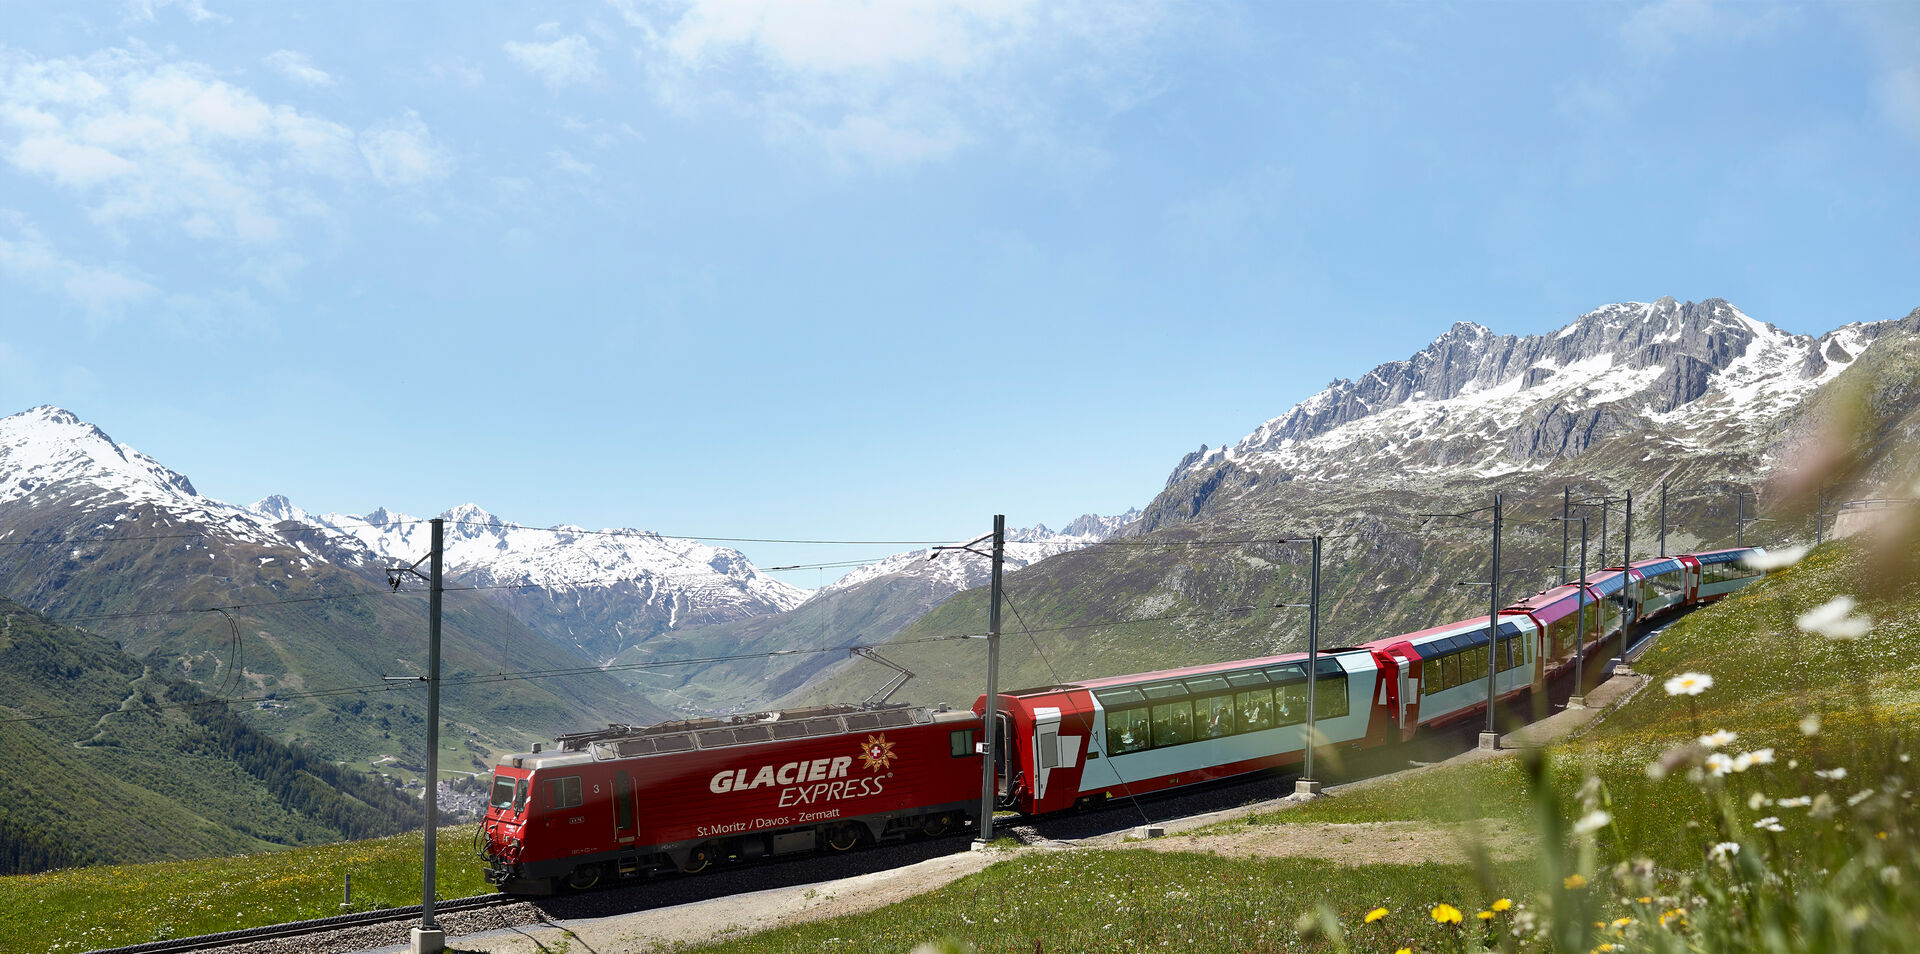 Classics of France, Switzerland and Italy